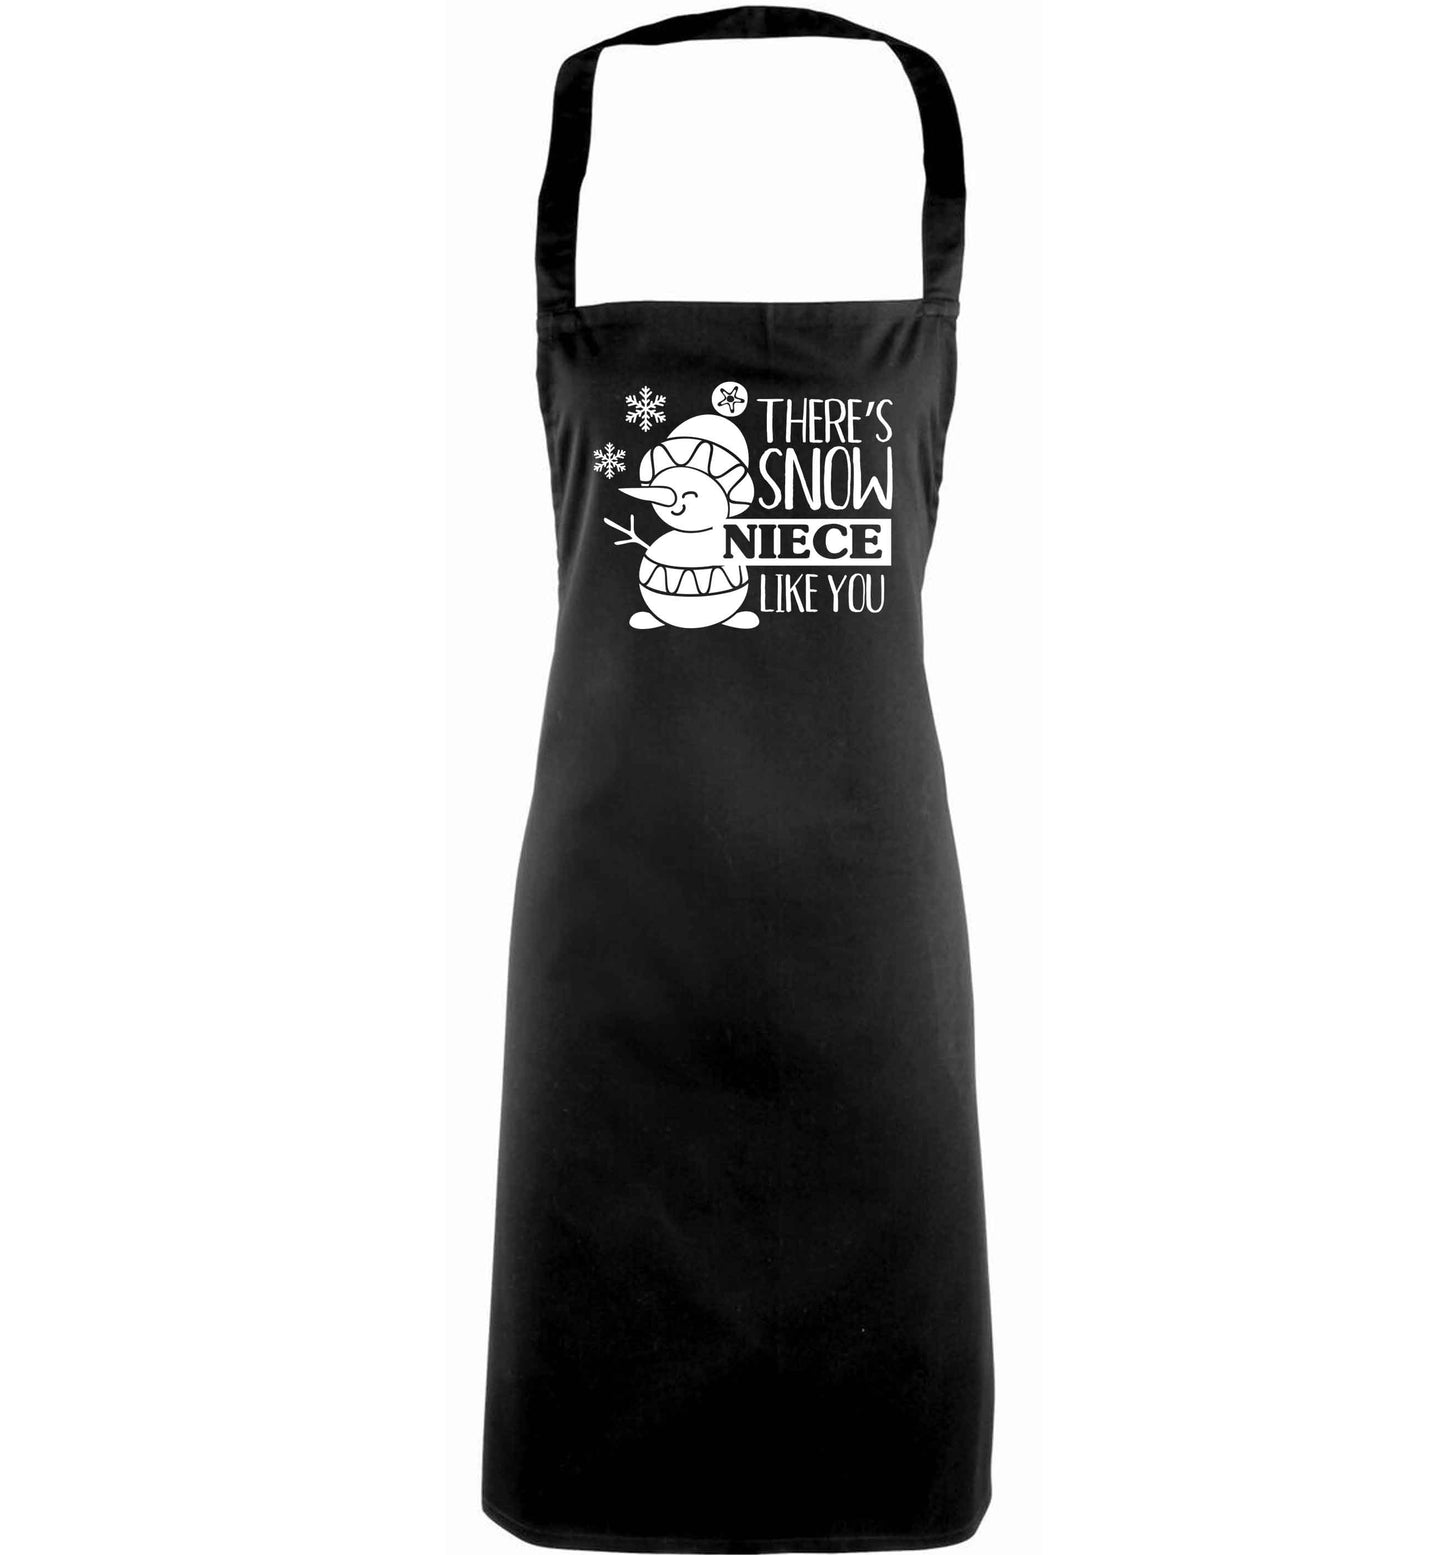 There's snow niece like you adults black apron